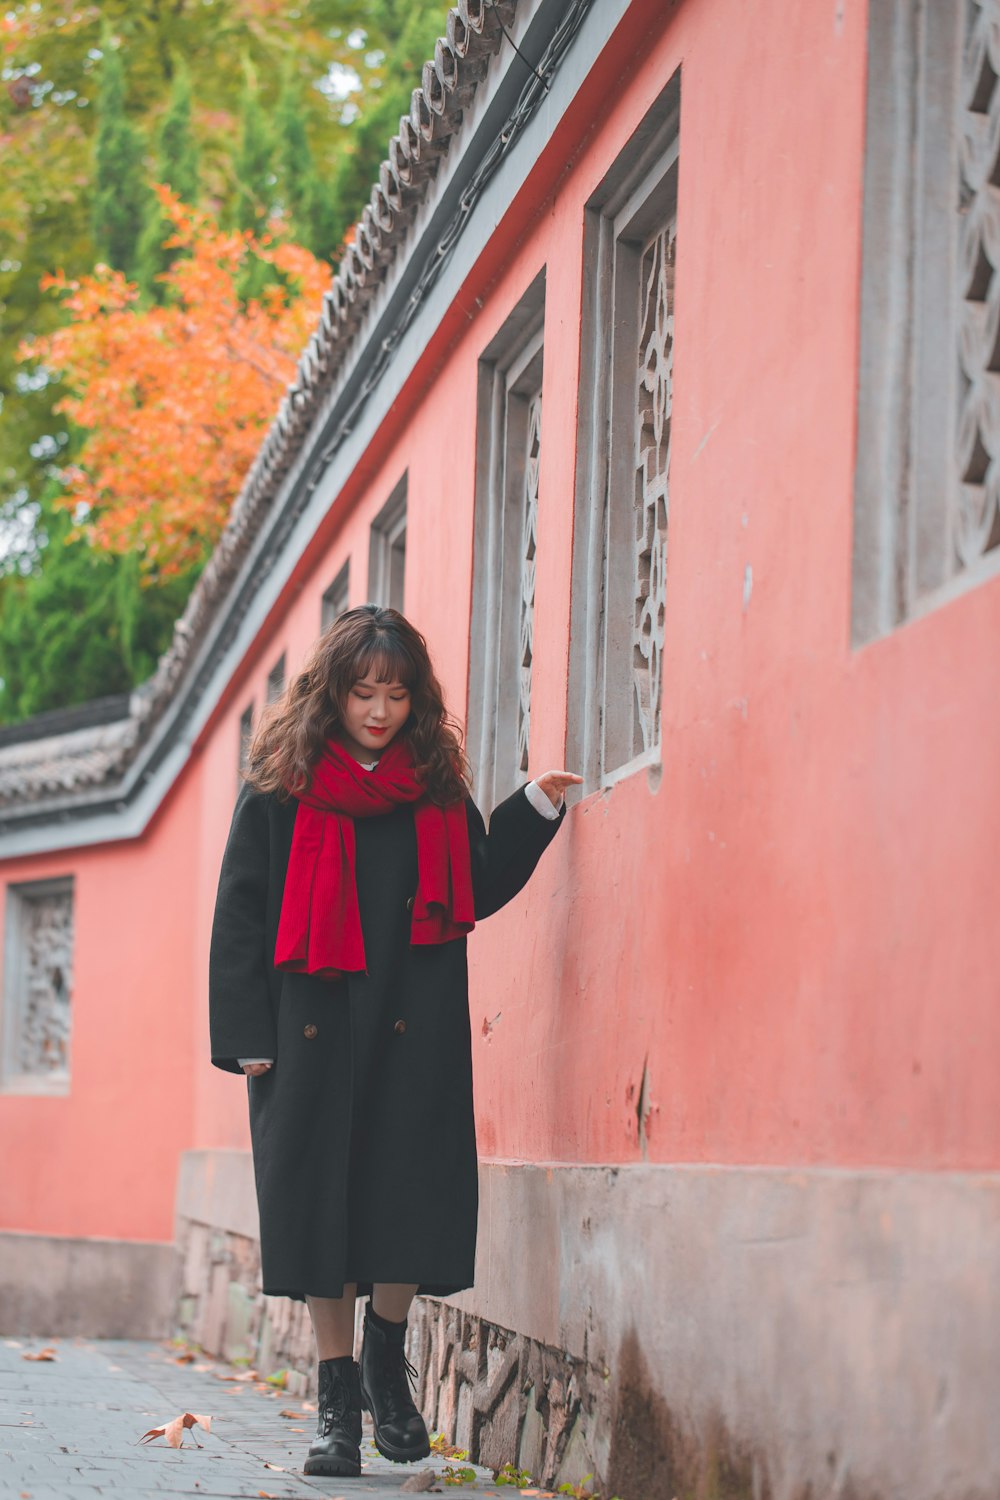 A woman in a black coat and a red scarf photo – Free Face Image on Unsplash